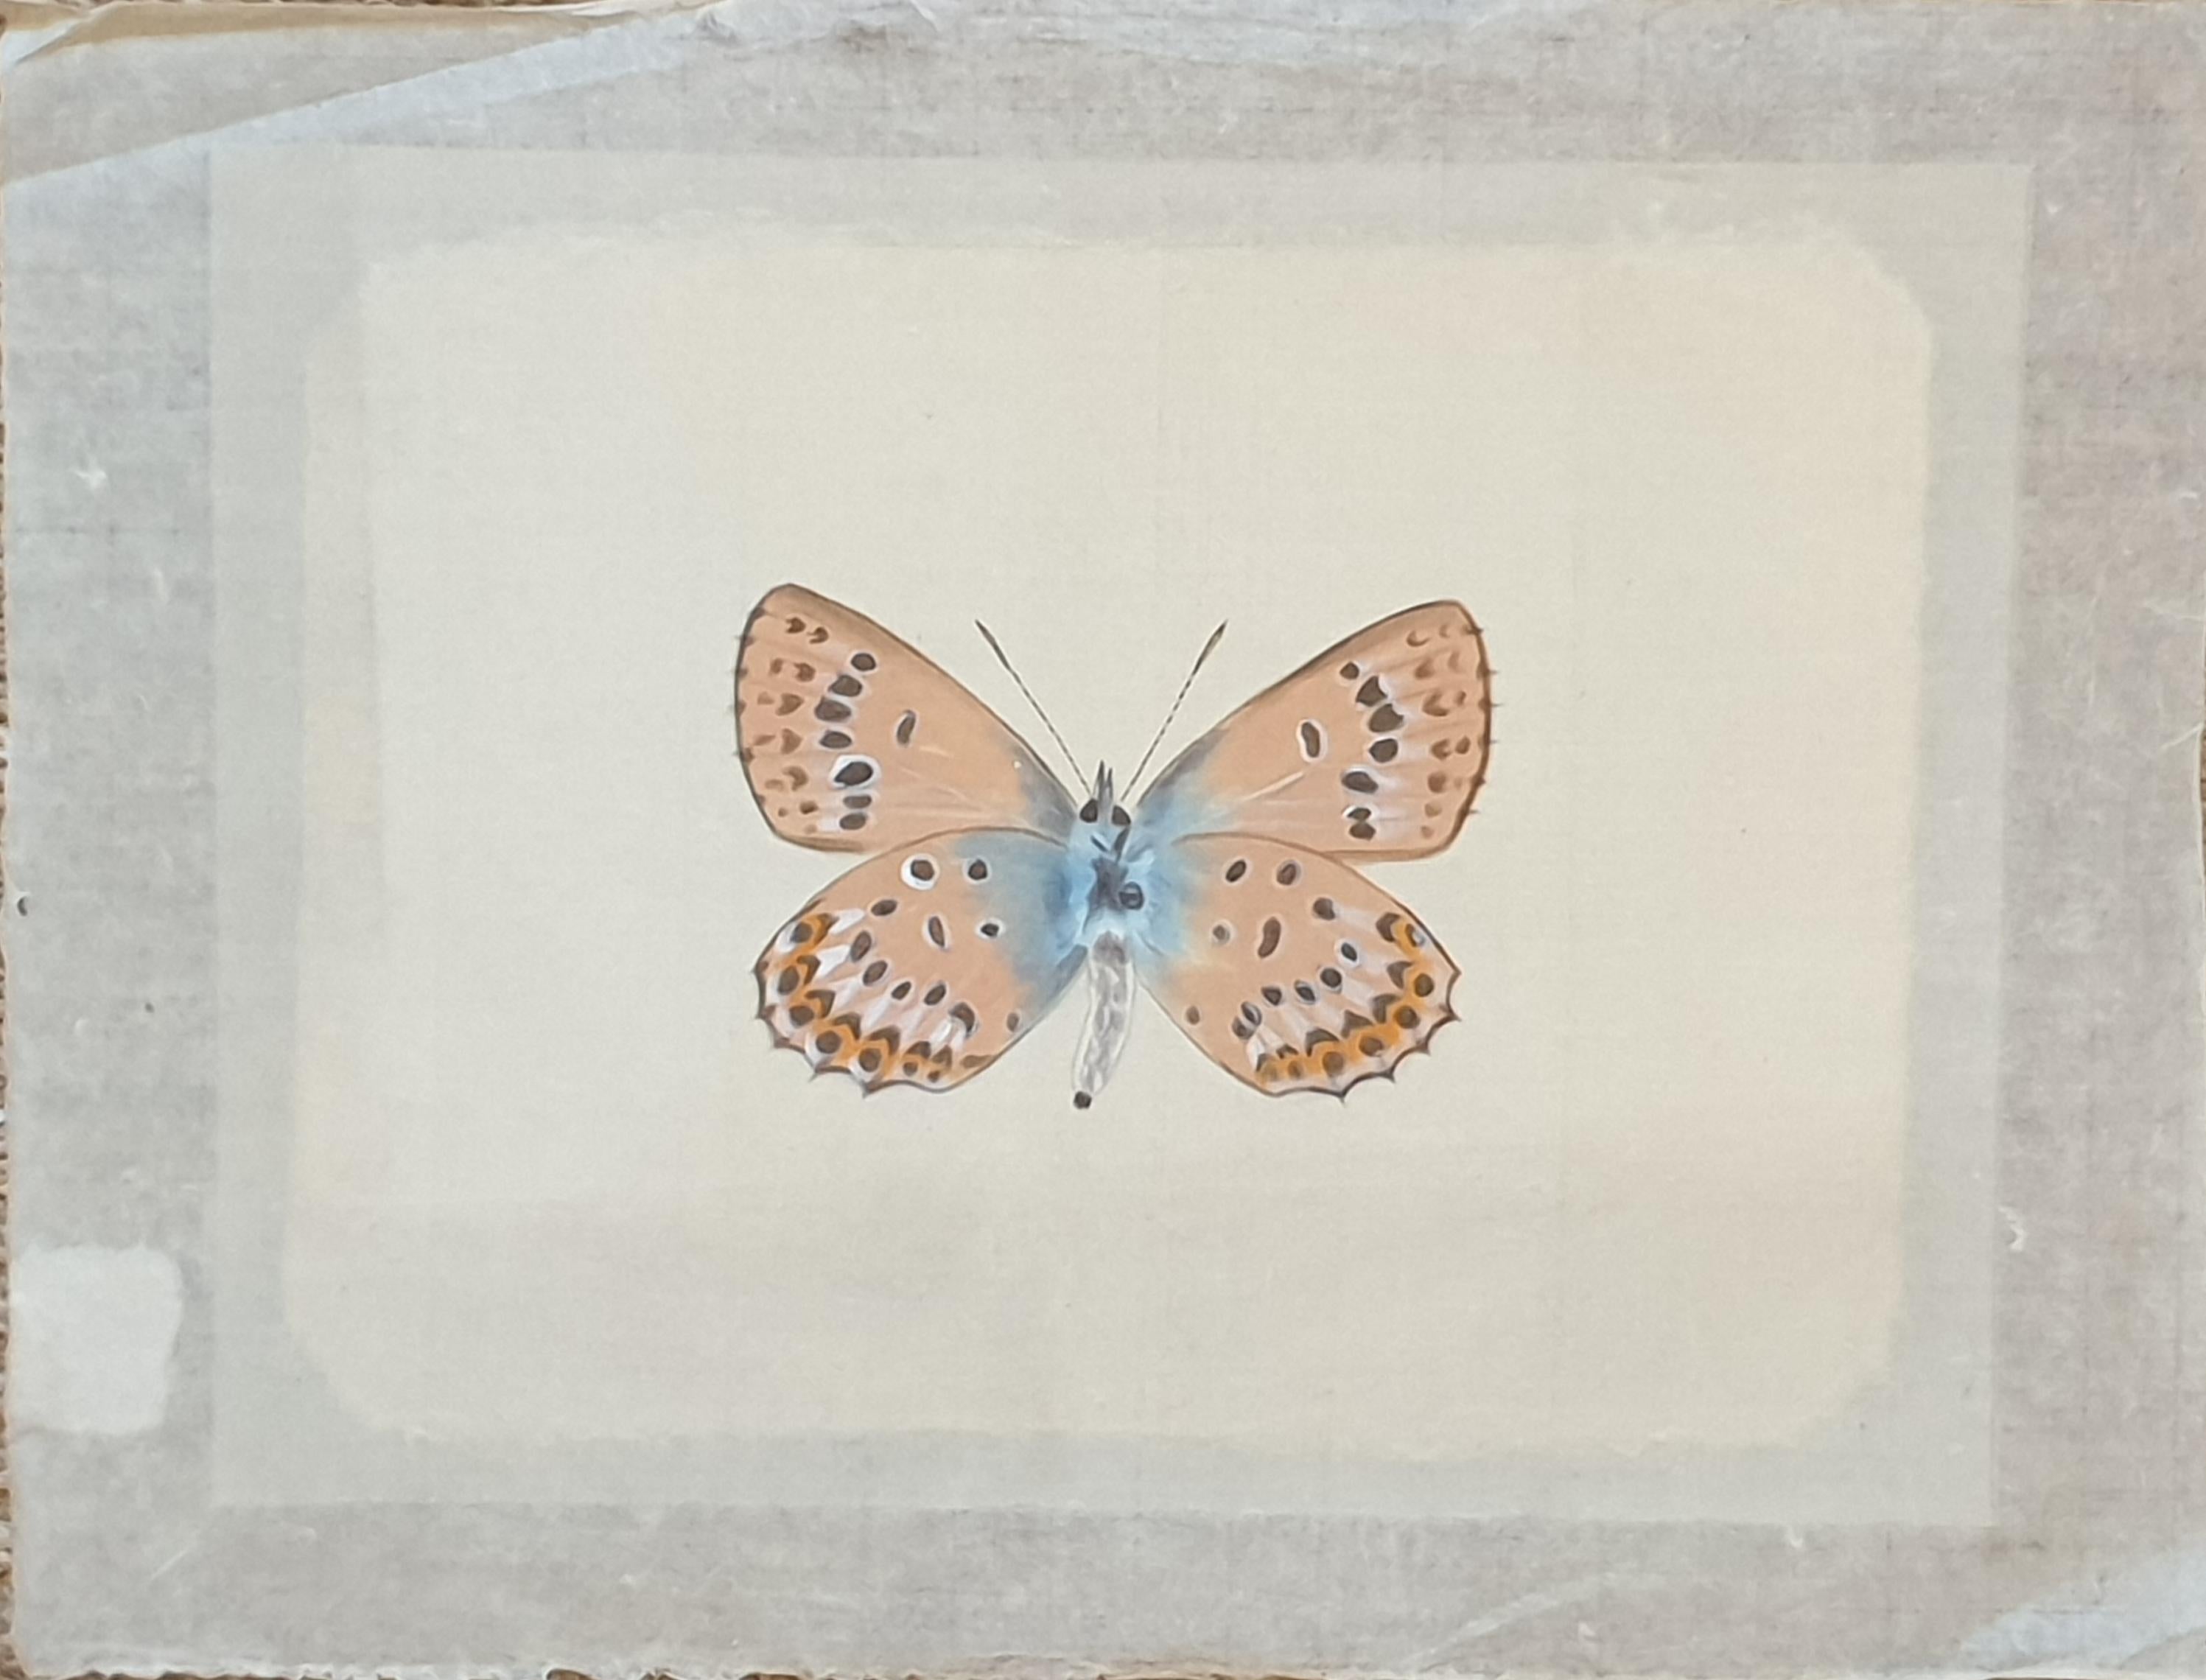 La Roche Laffitte Animal Painting - Study of a Butterfly, Watercolour on Silk Applied to Handmade Paper. 